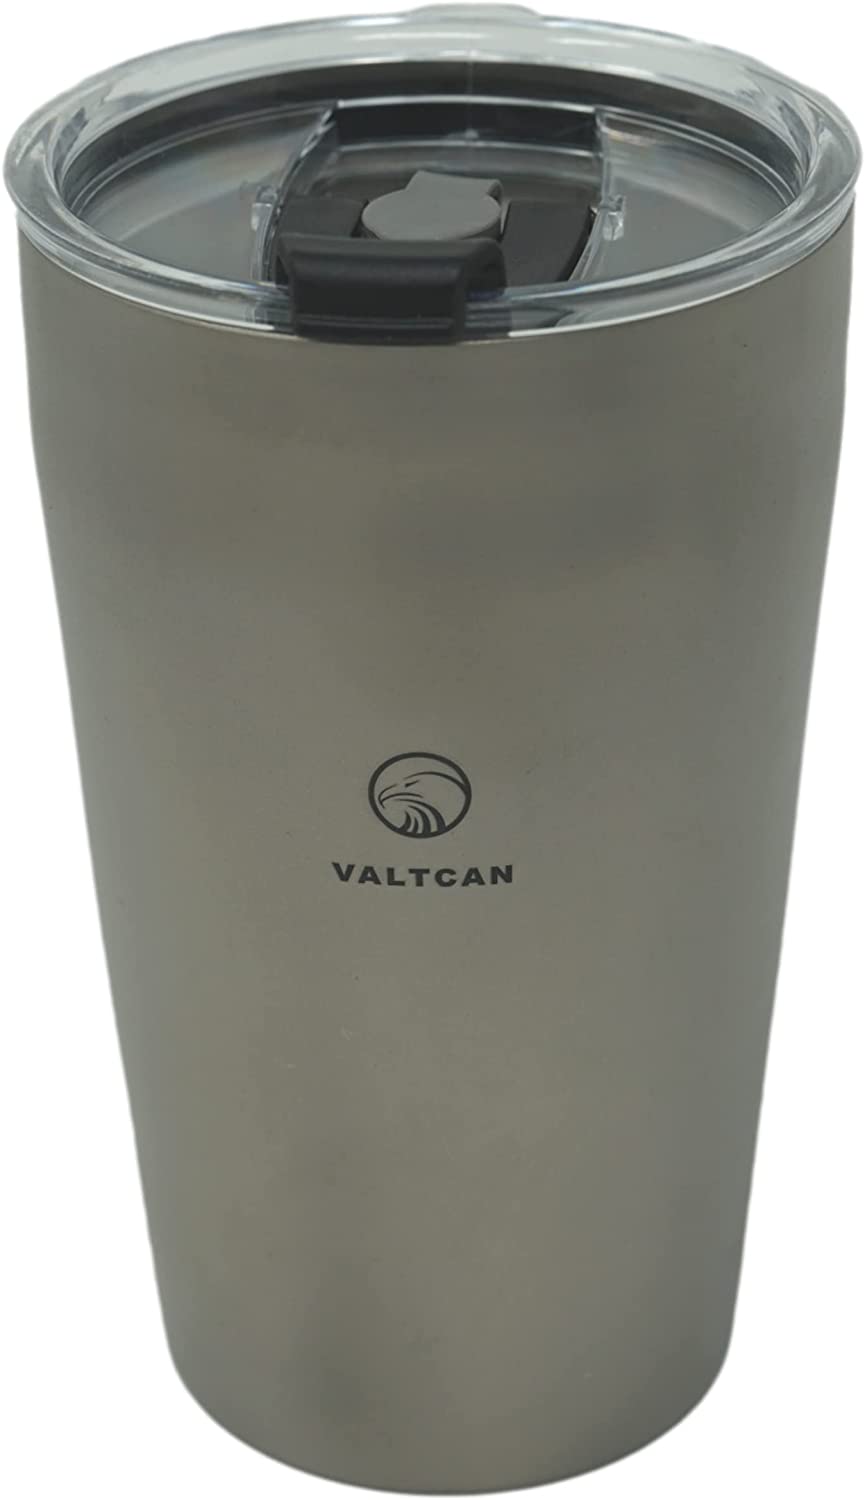 Valtcan Titanium Beer Cup Mug 500ml Double Wall with Lid 16.9 fl oz 269g